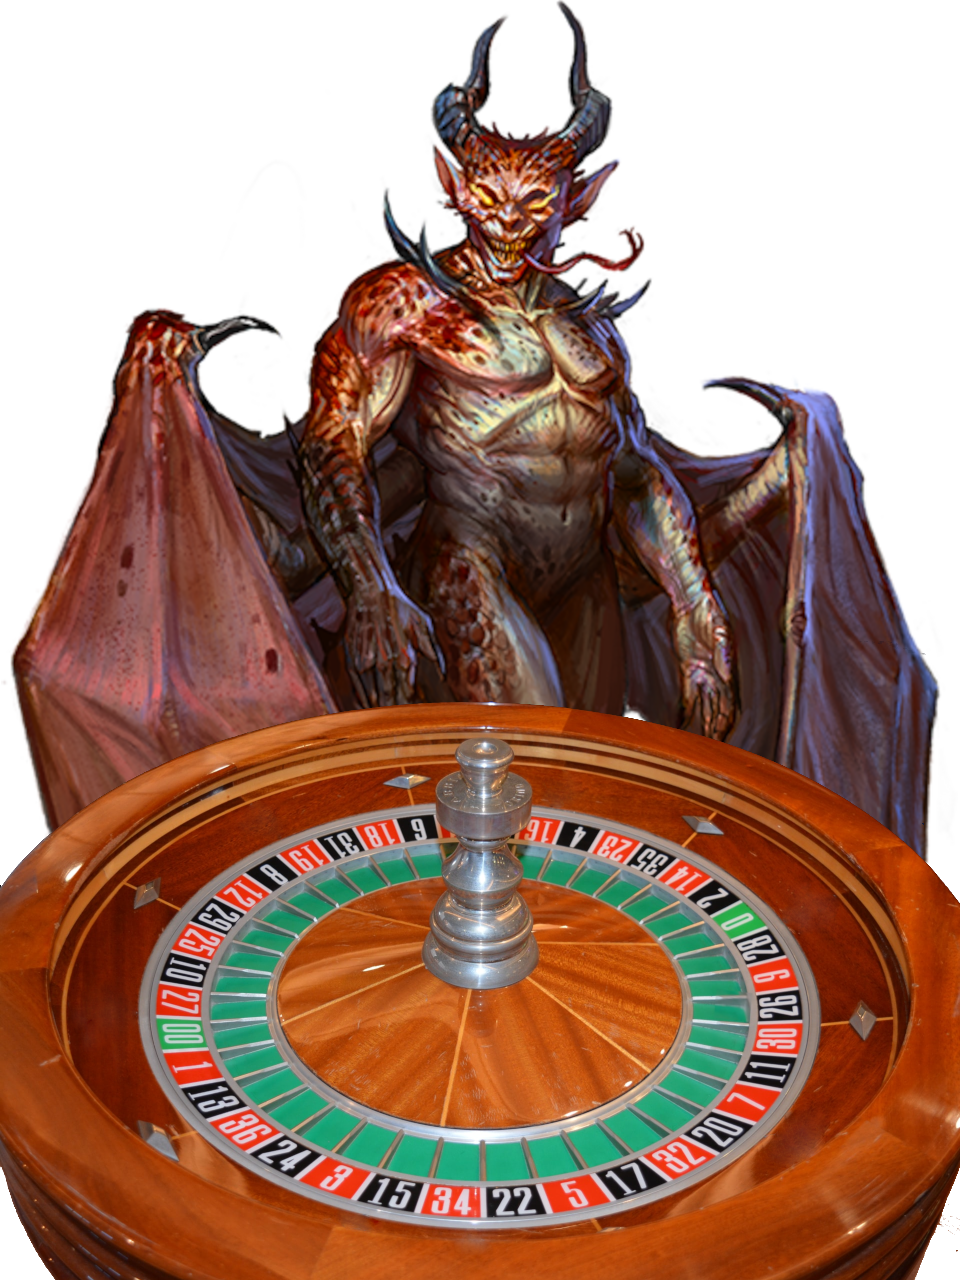 A Pit Fiend standing behind a roulette wheel